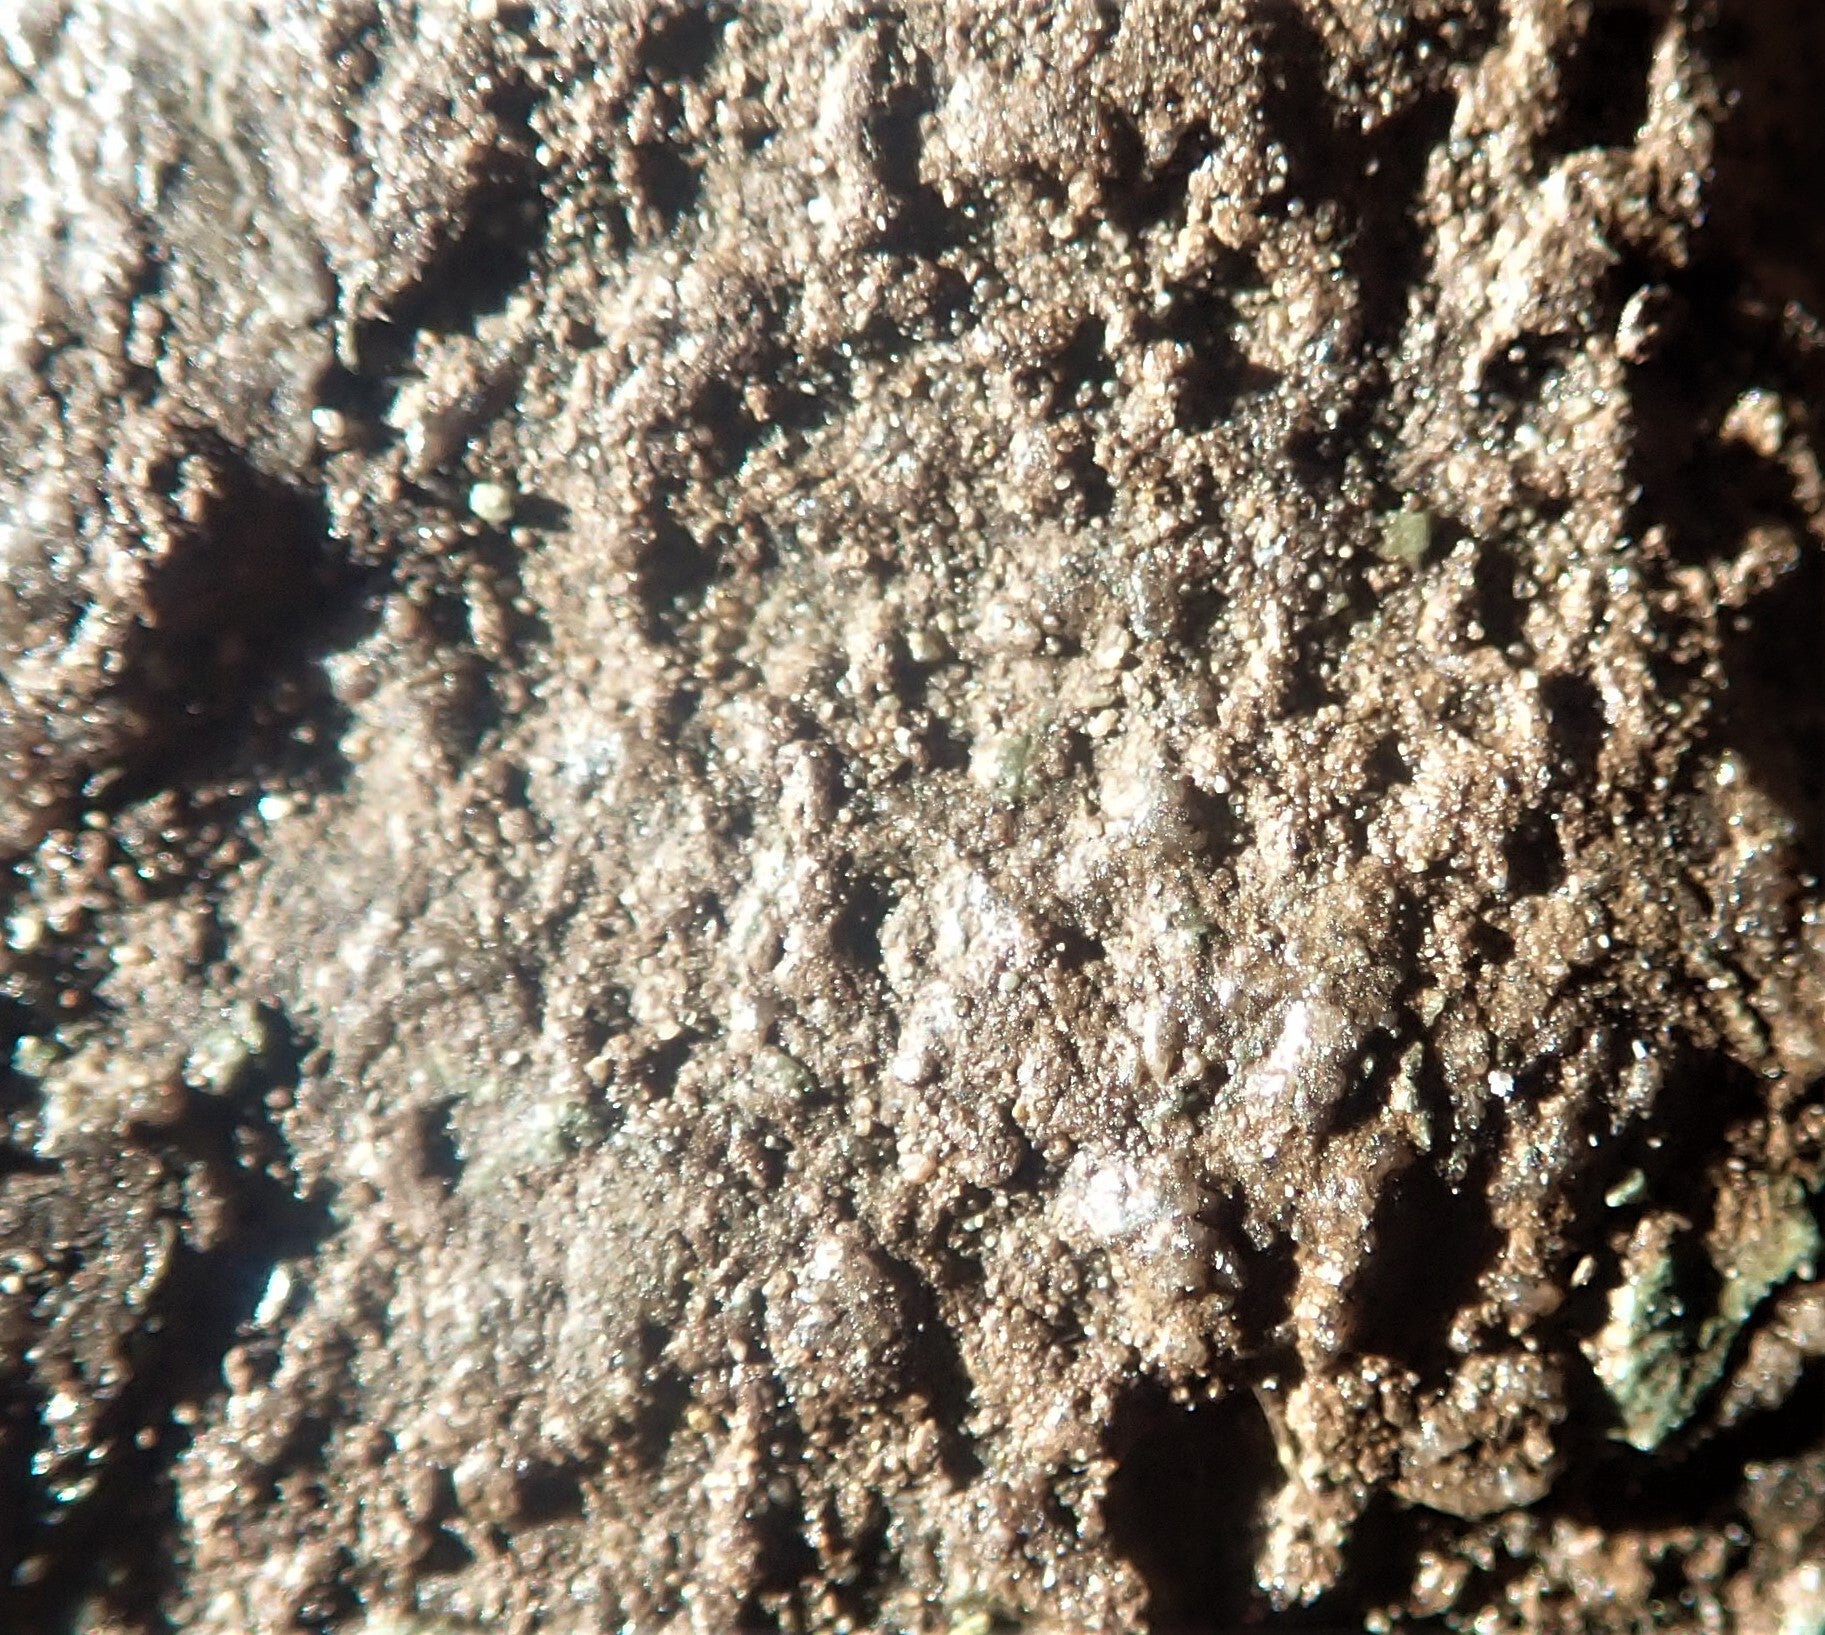 Close-up of the pustular surface texture of interpreted mummified skin.  (Photo: Courtesy Roger Smith)